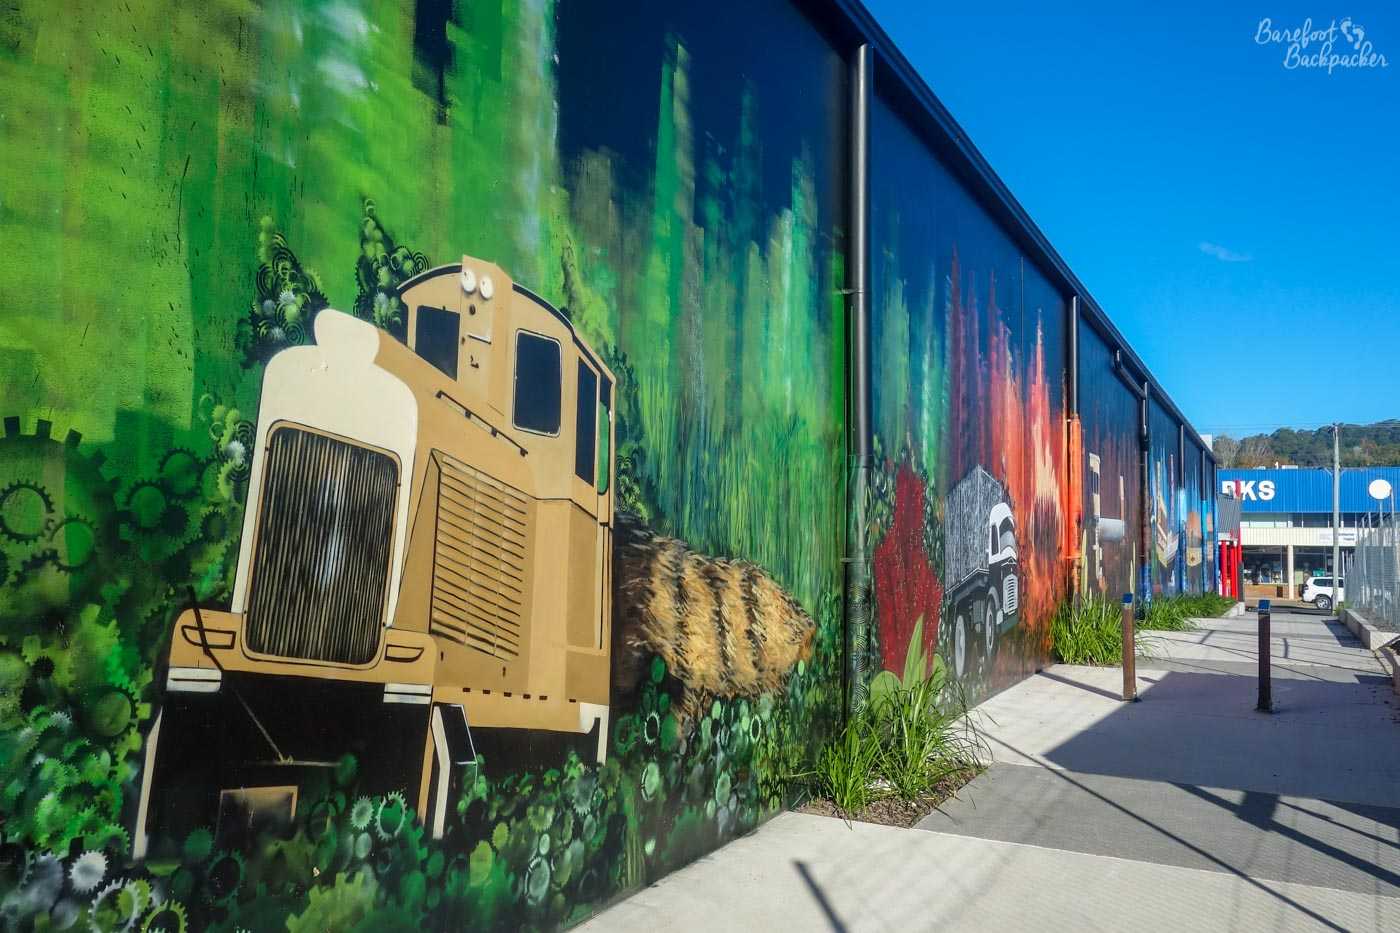 Mural on a wall in Nambour, depicting part of the history of the town. This section shows the big farming equipment used to harvest the sugar cane.